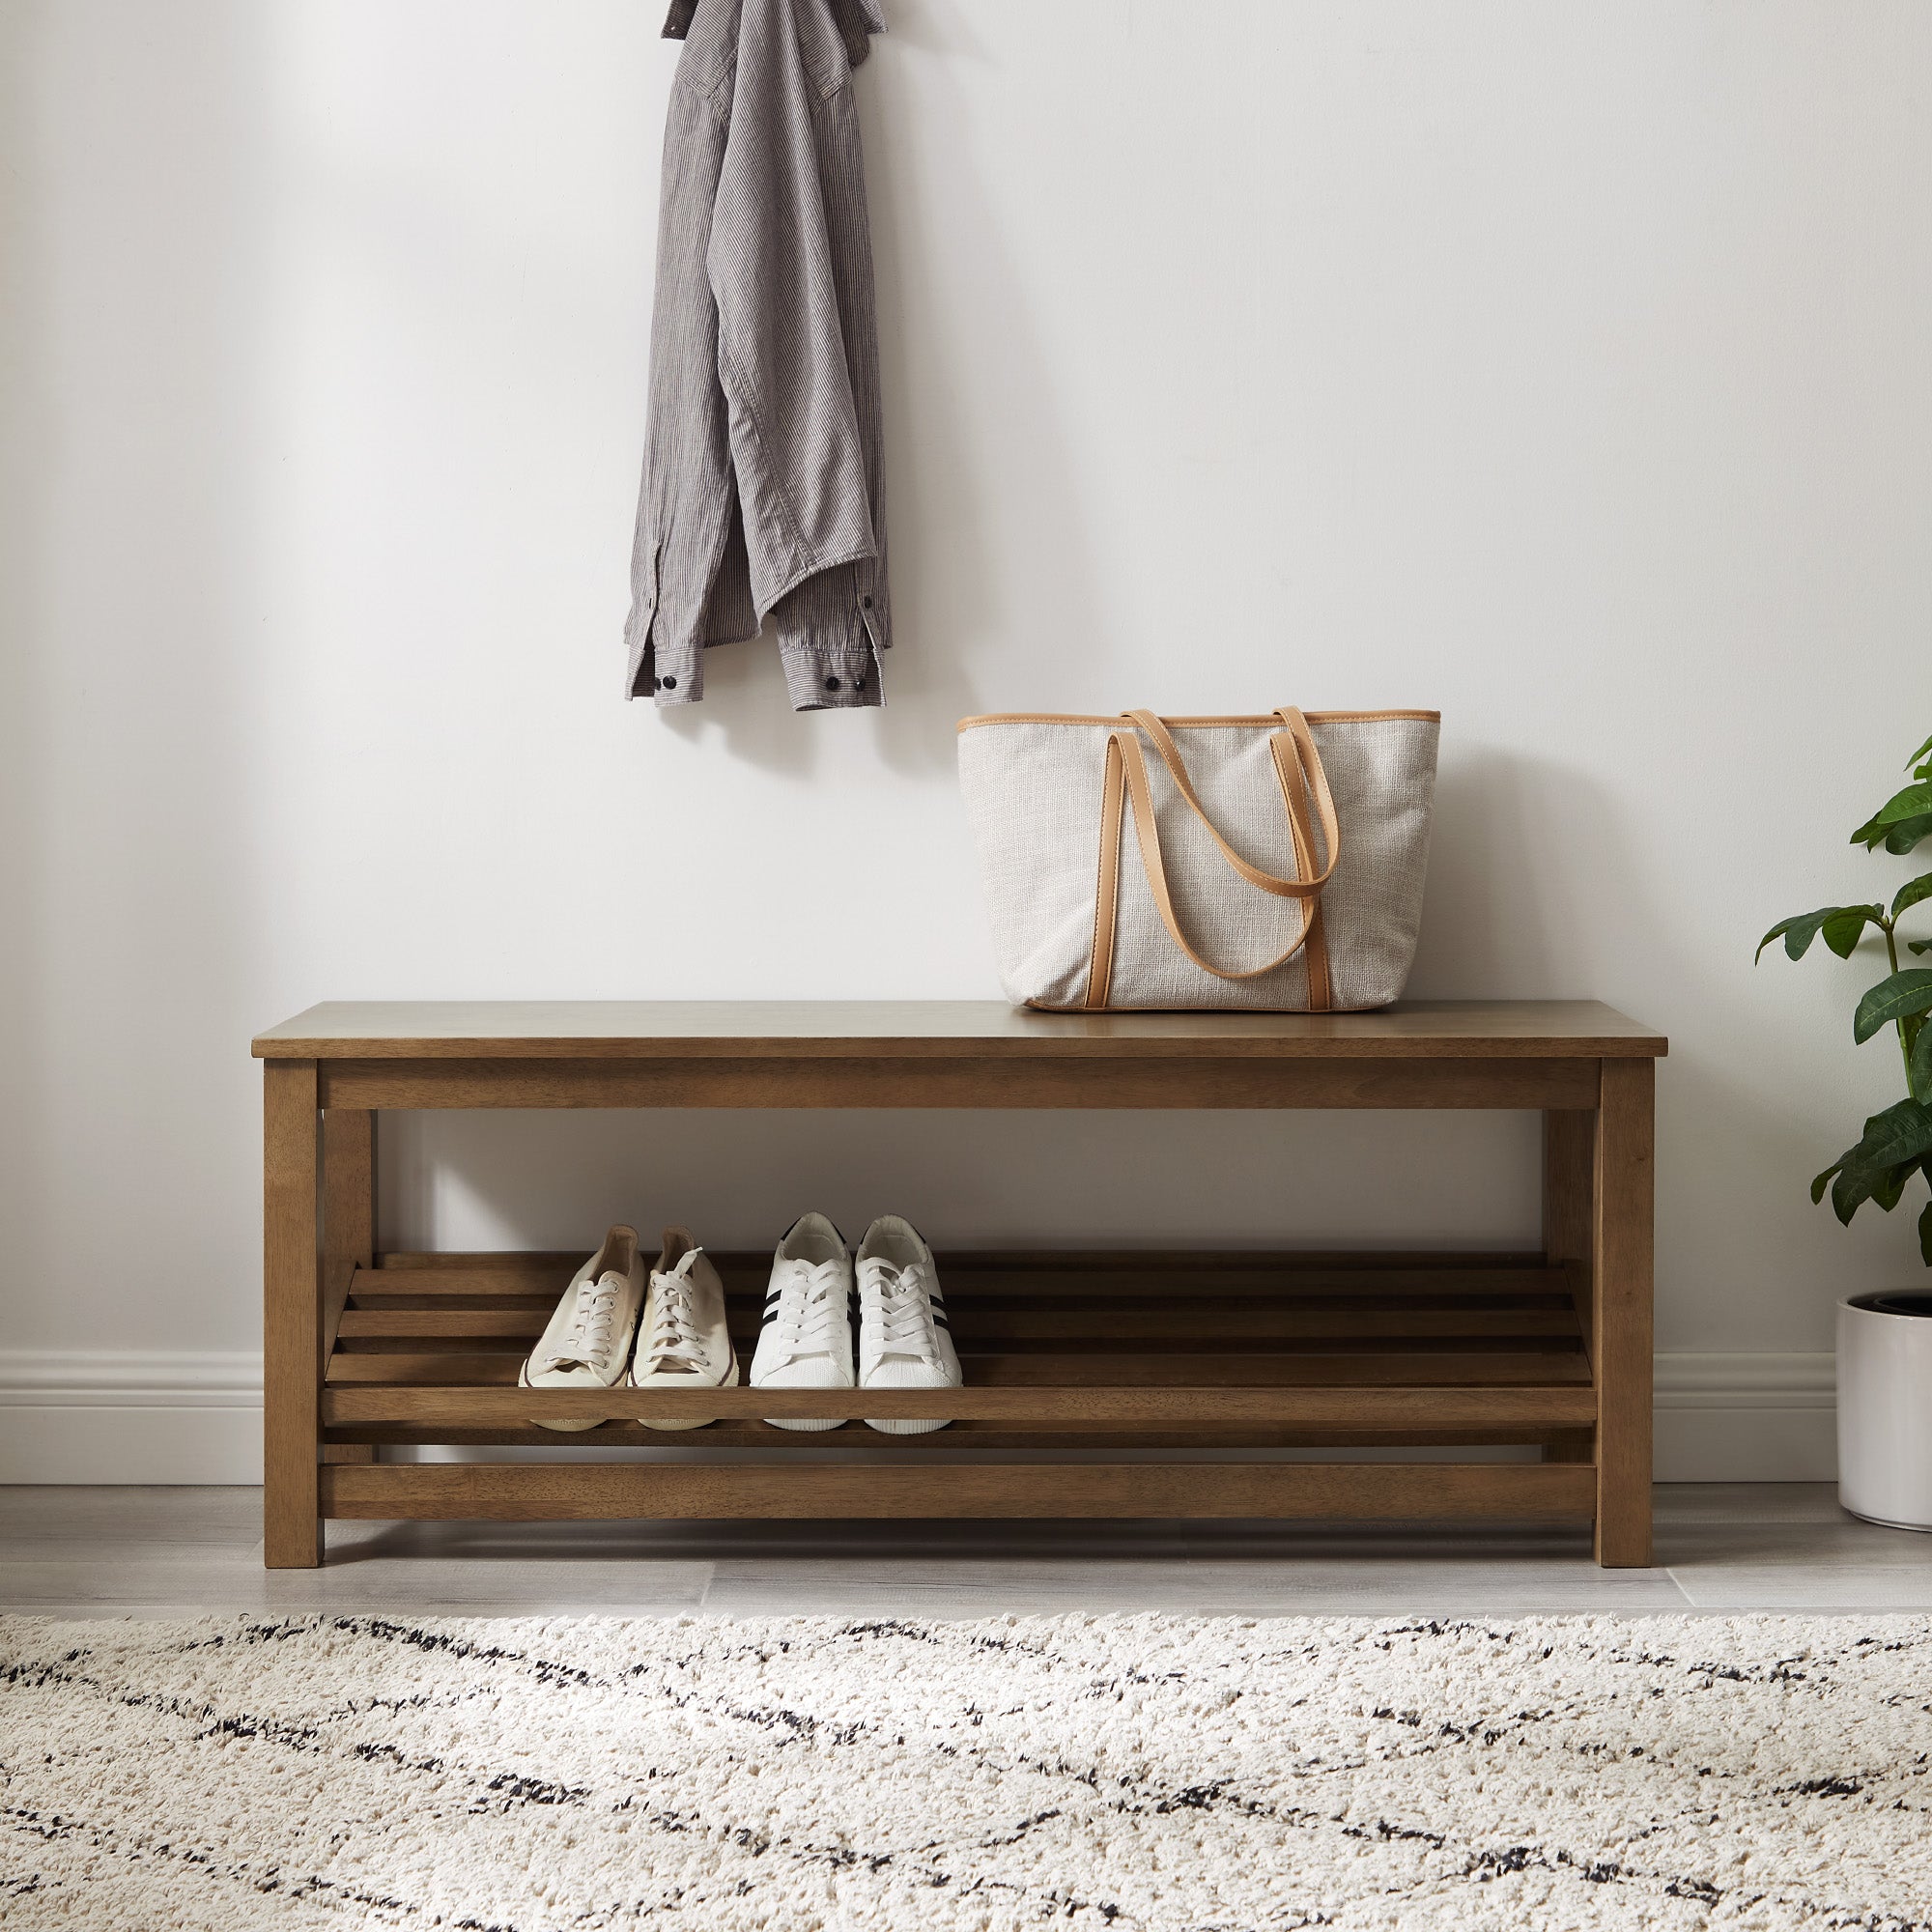 36 Inches Rustic Entryway Bench, Modern Entryway Bench, Bench Storage, Shoe  Organizer, Entryway Bench, Shoe Bench Wood 